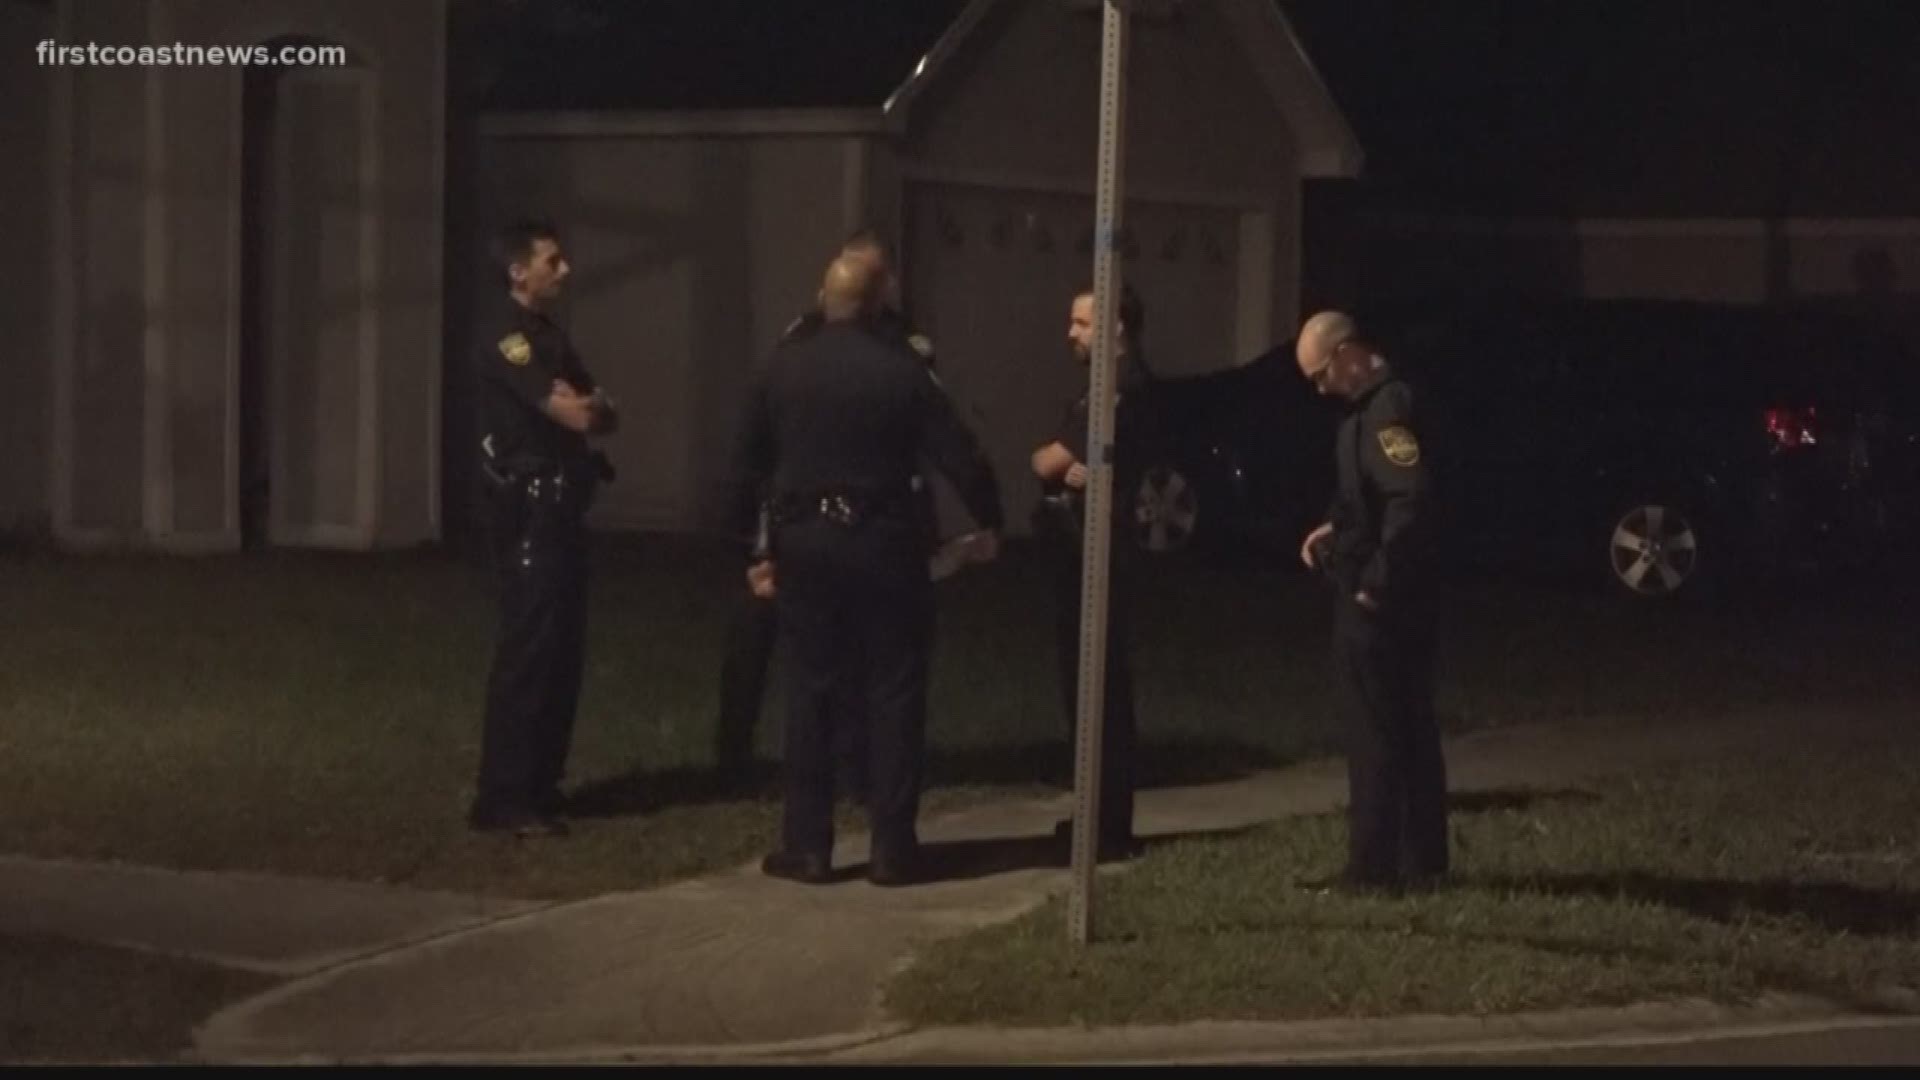 According to the Jacksonville Sheriff's Office, police responded to a report of a person shot in the 7000 block of Lady Smith Lane sometime around 3 a.m.